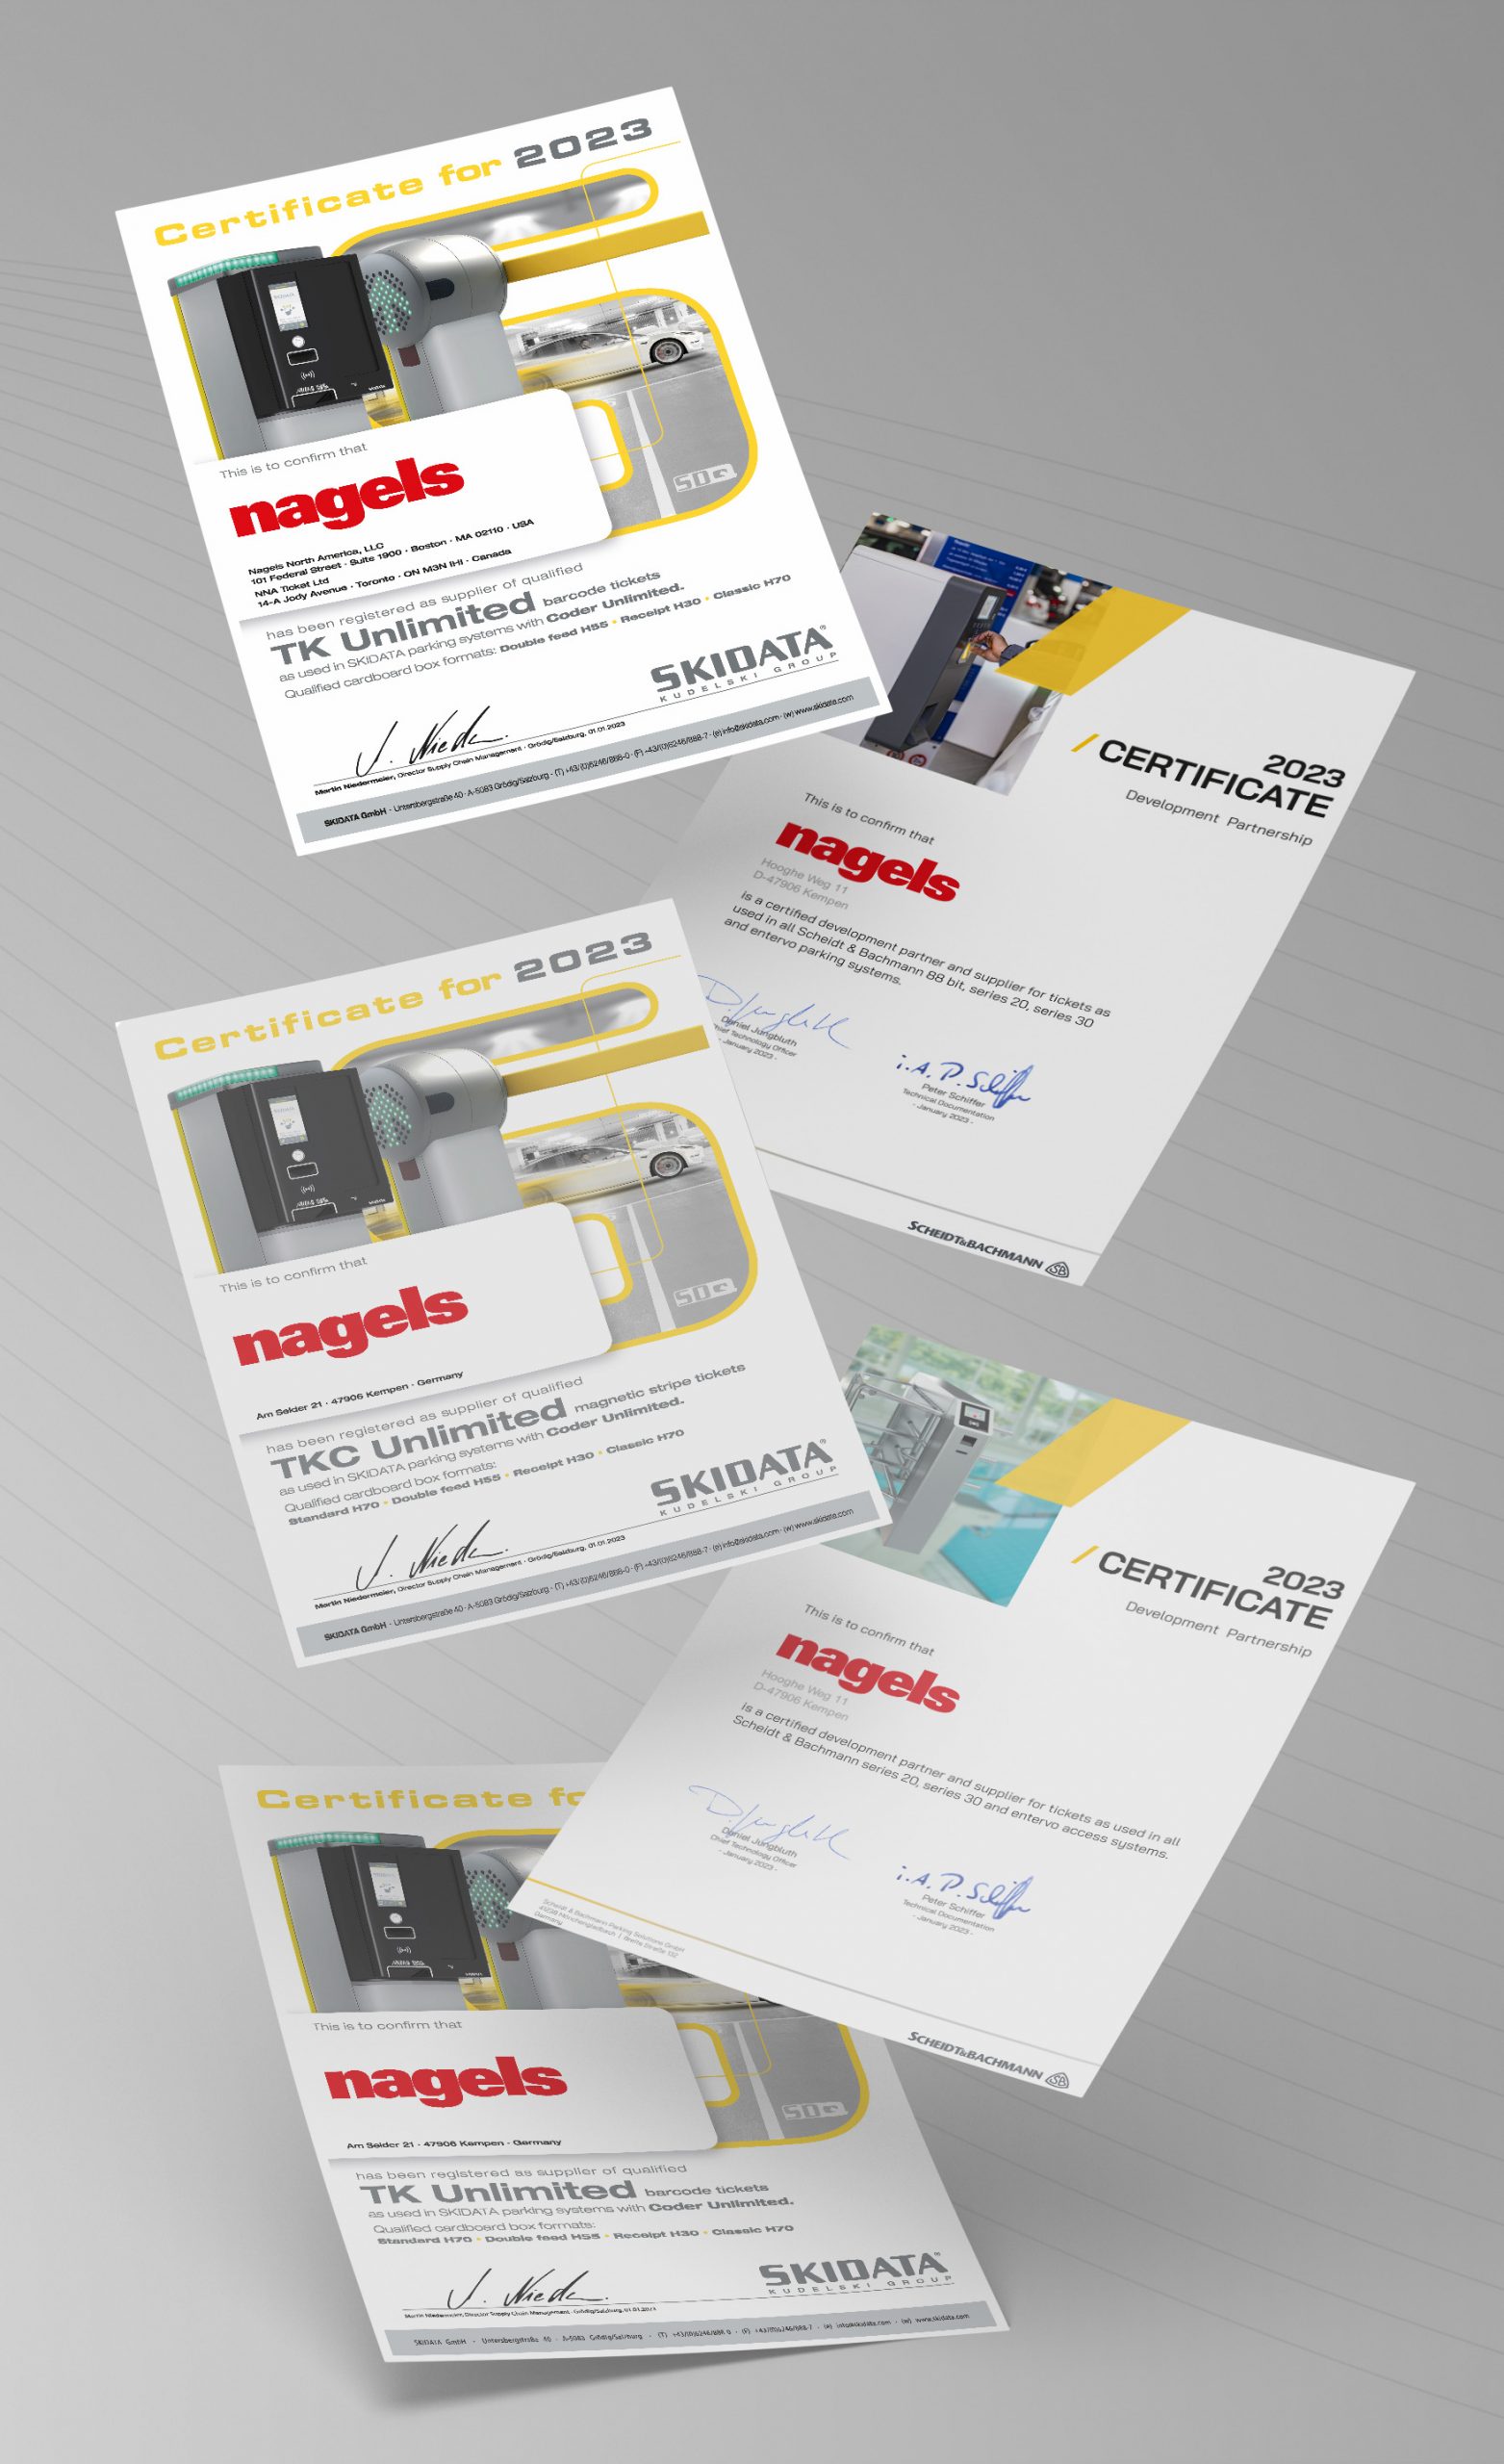 nagels certificates for 2023 from Scheidt & Bachmann and Skidata